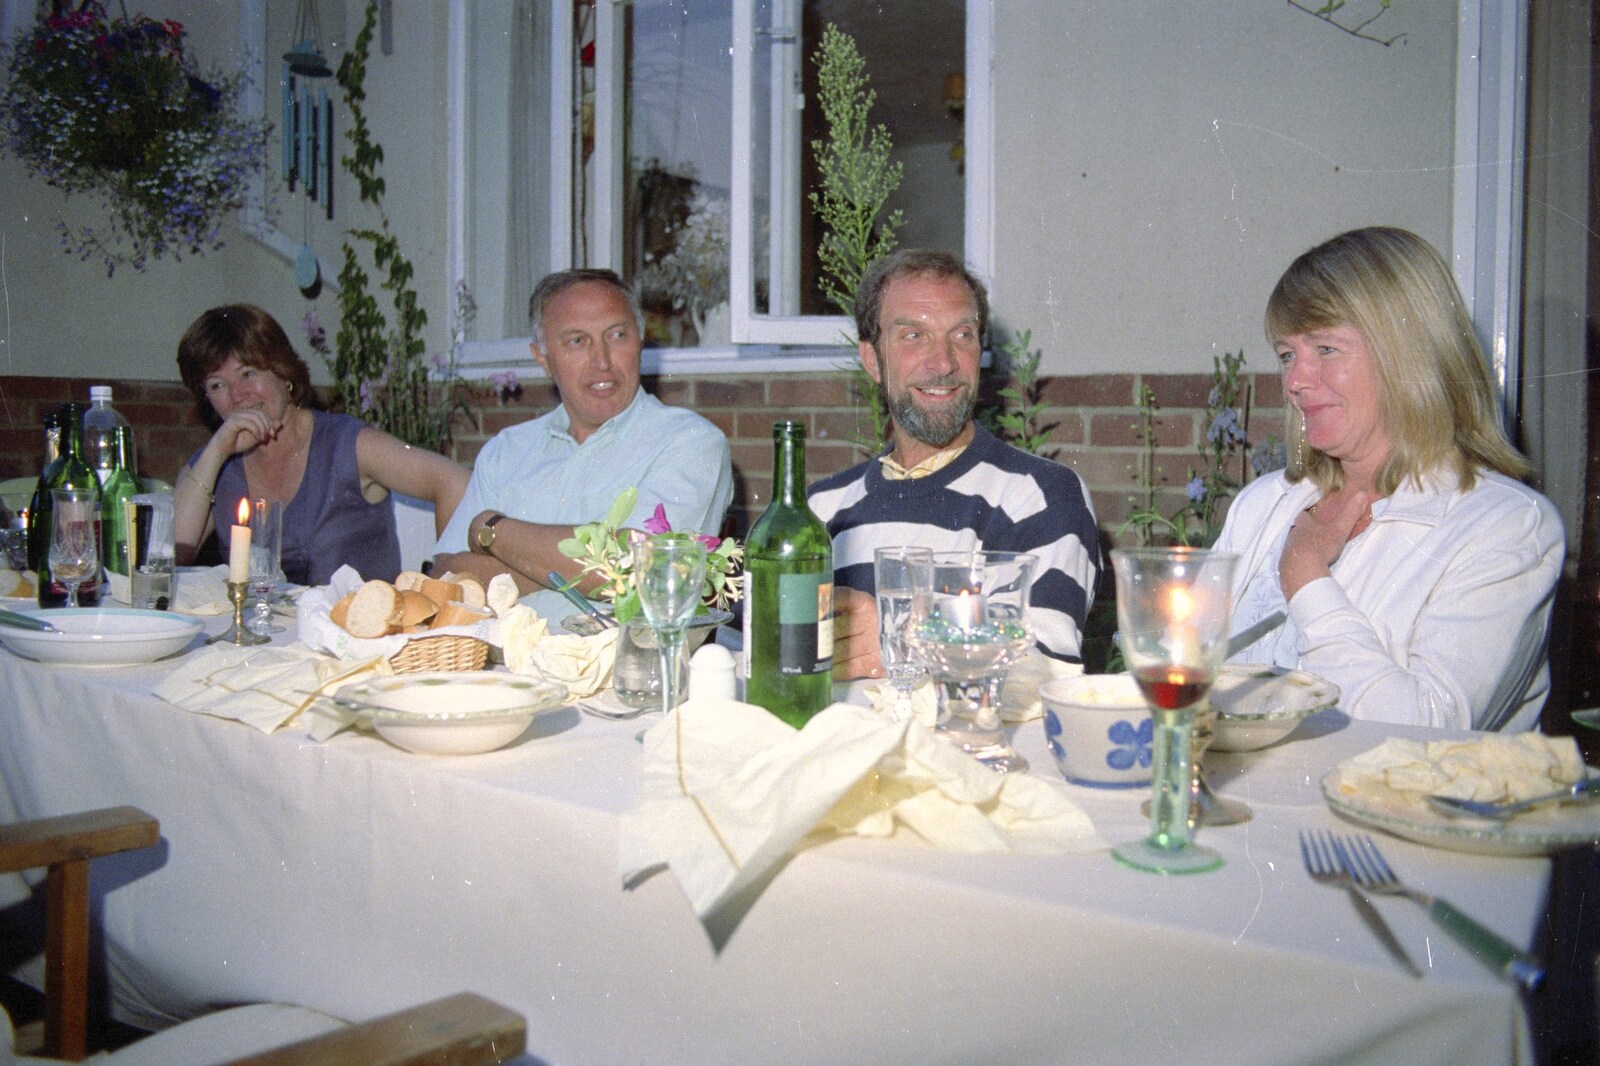 Post-dinner conversation from A CISU Trip to Wimereux and the Swiss Rellies, France and Dorset - 6th July 1997